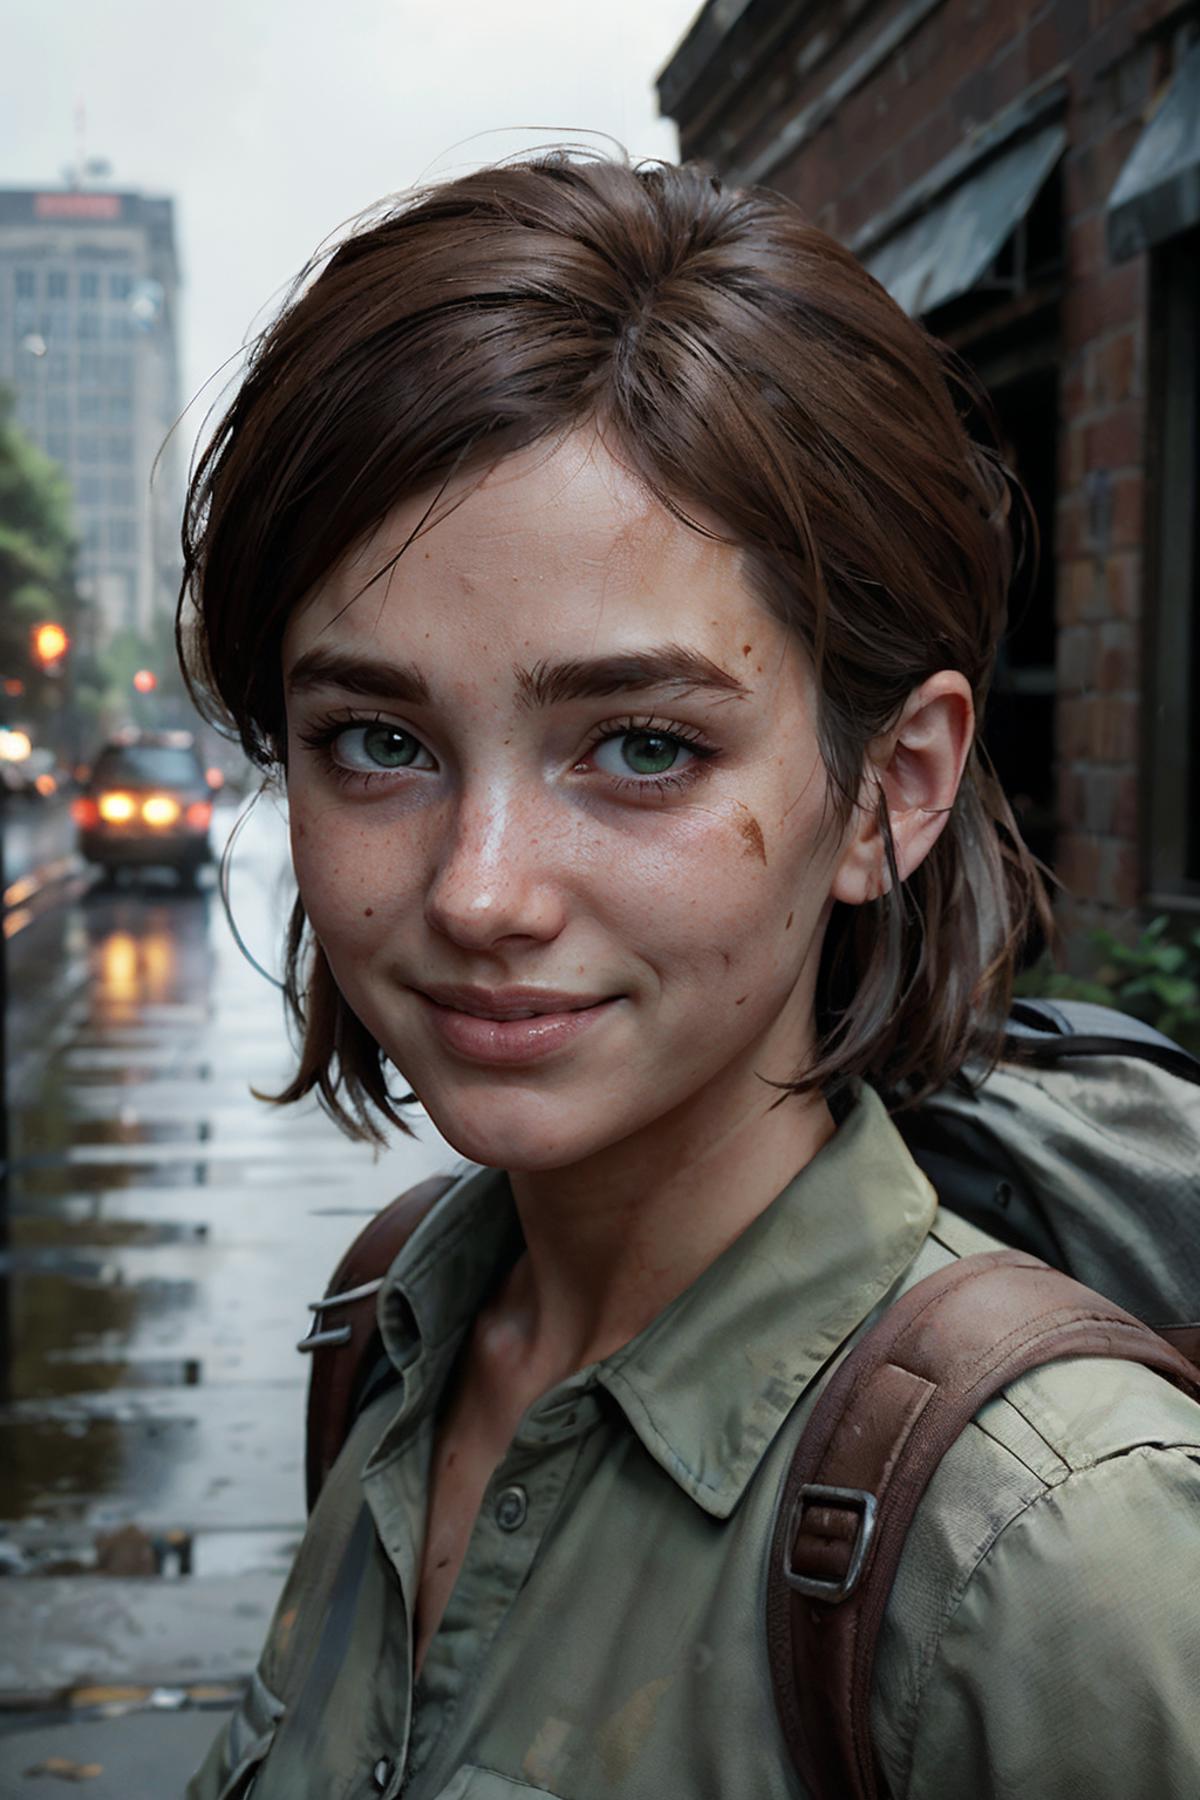 Ellie from The Last of Us 2 image by wikkitikki